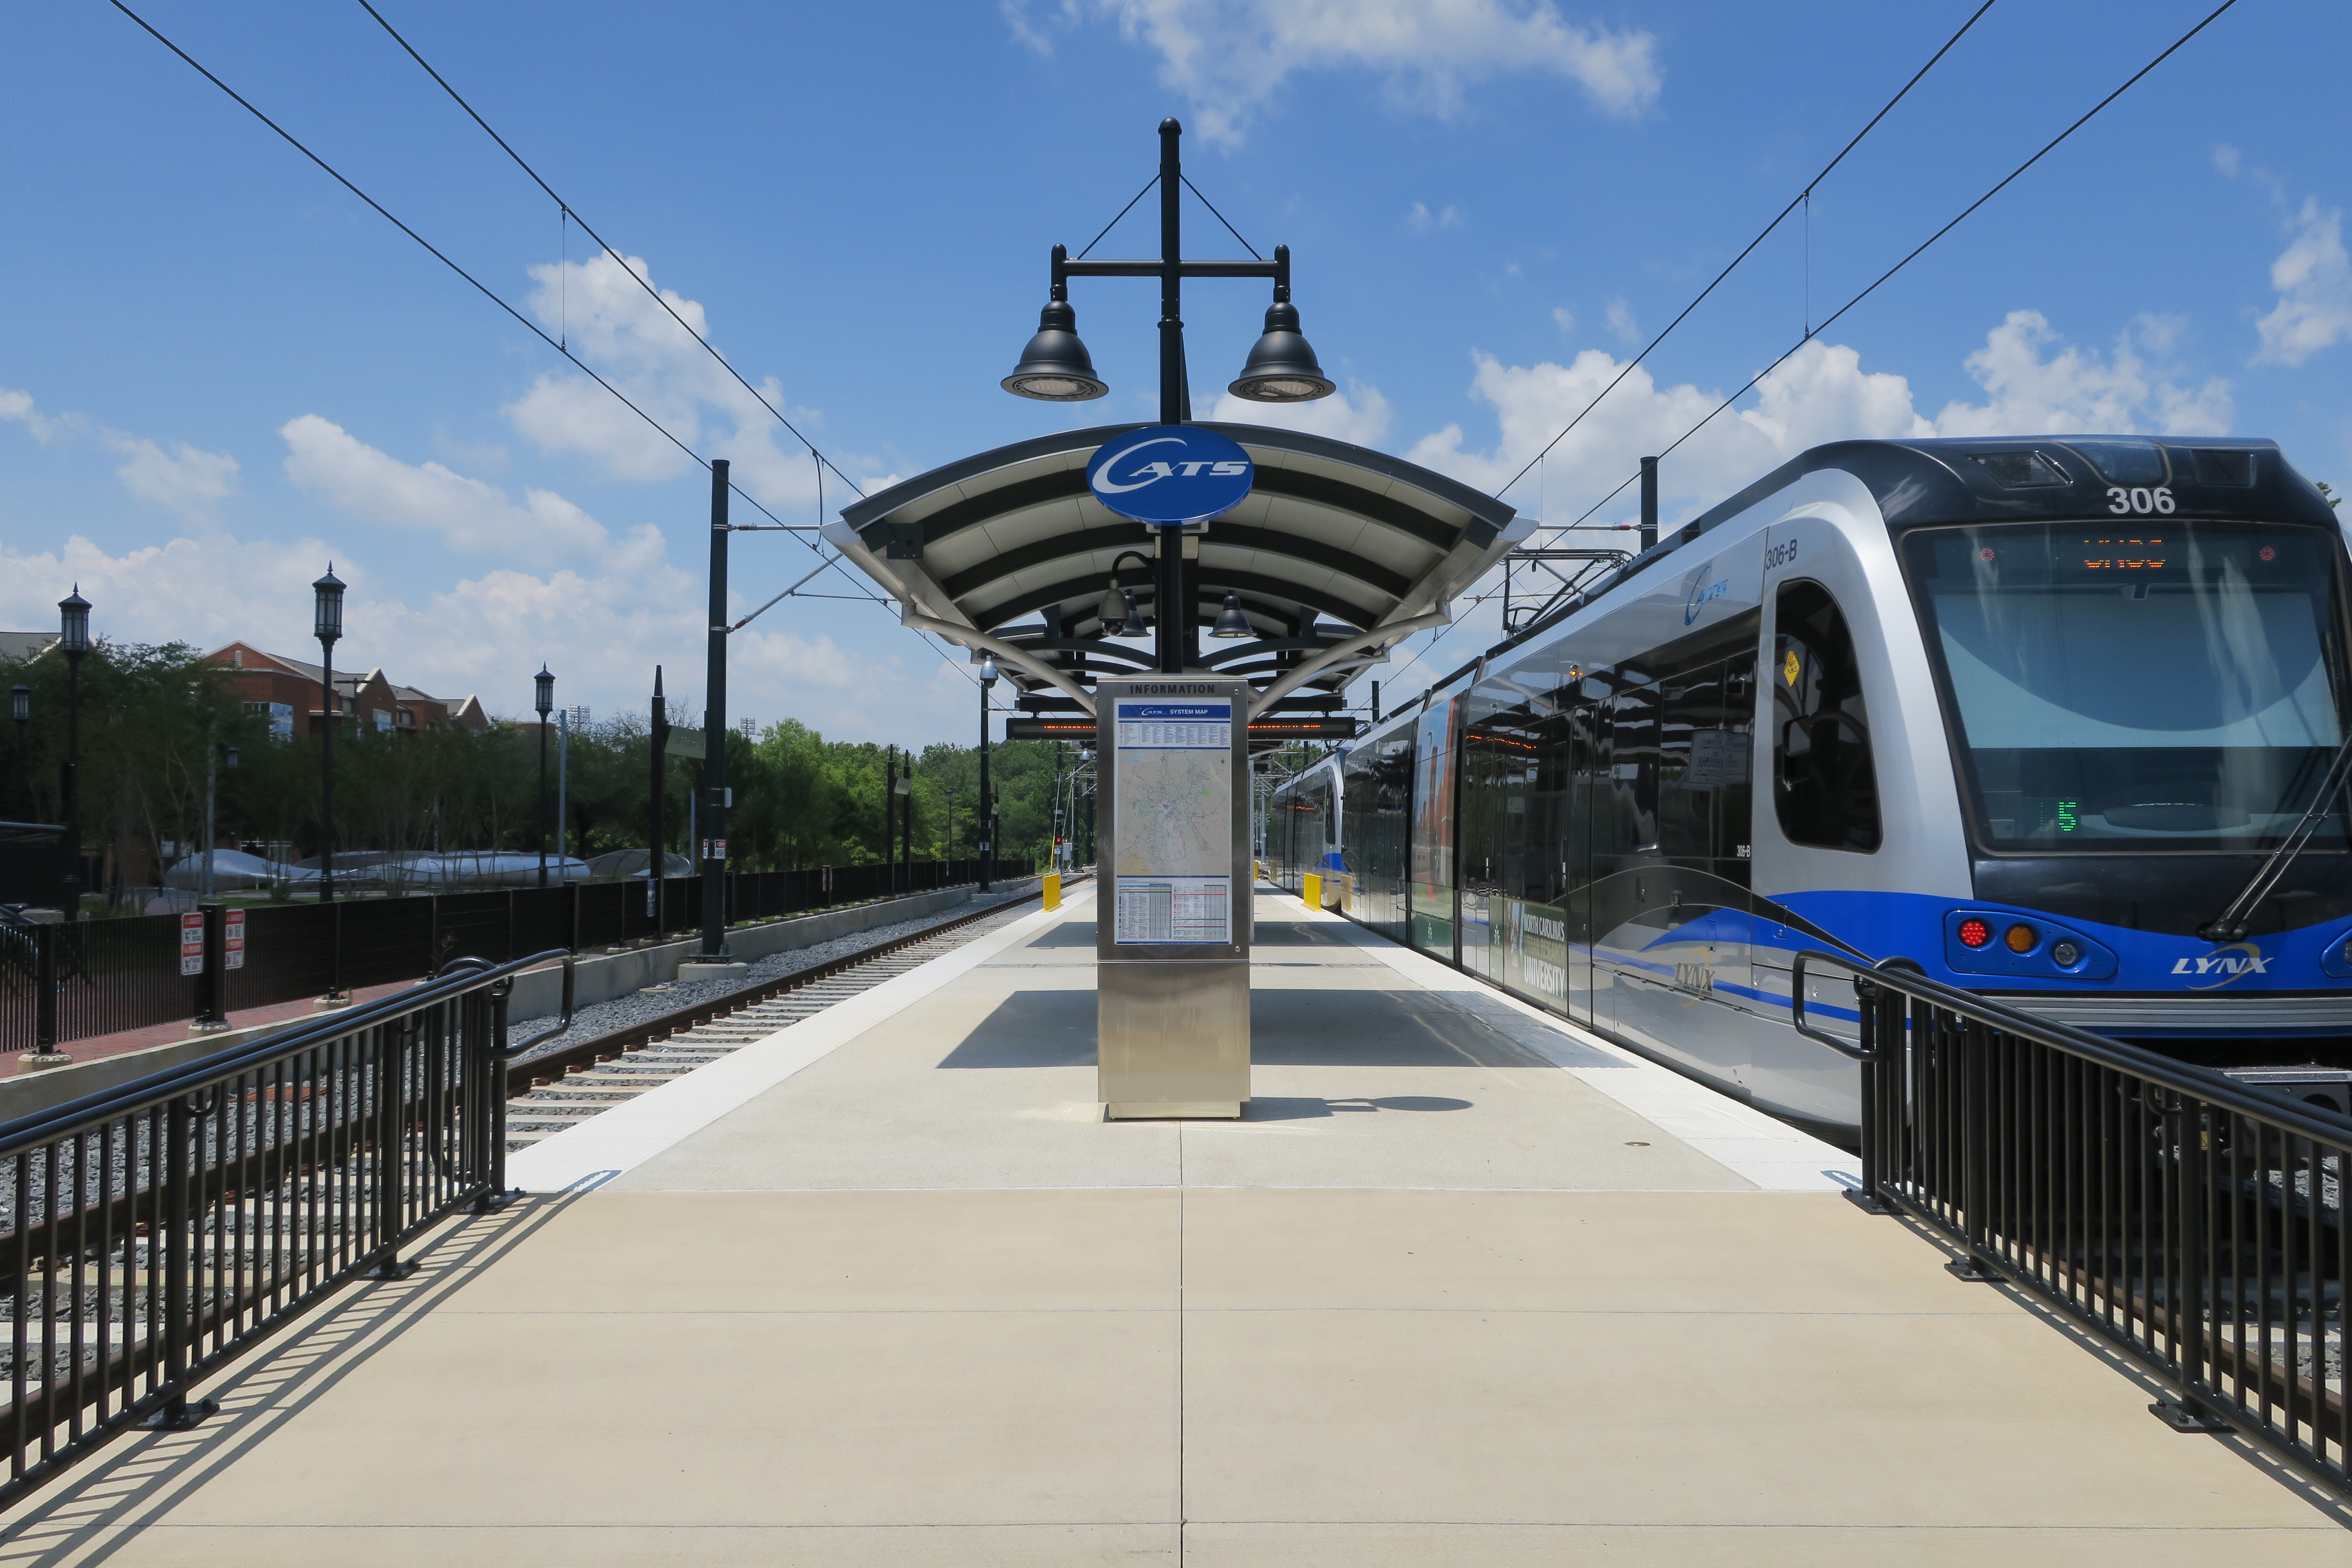 A Blue Line train at the UNC Charlotte Main Station platform. Image captured by user Jacob G of Cleveland, United States, licensed by CC BY-SA 2.0.